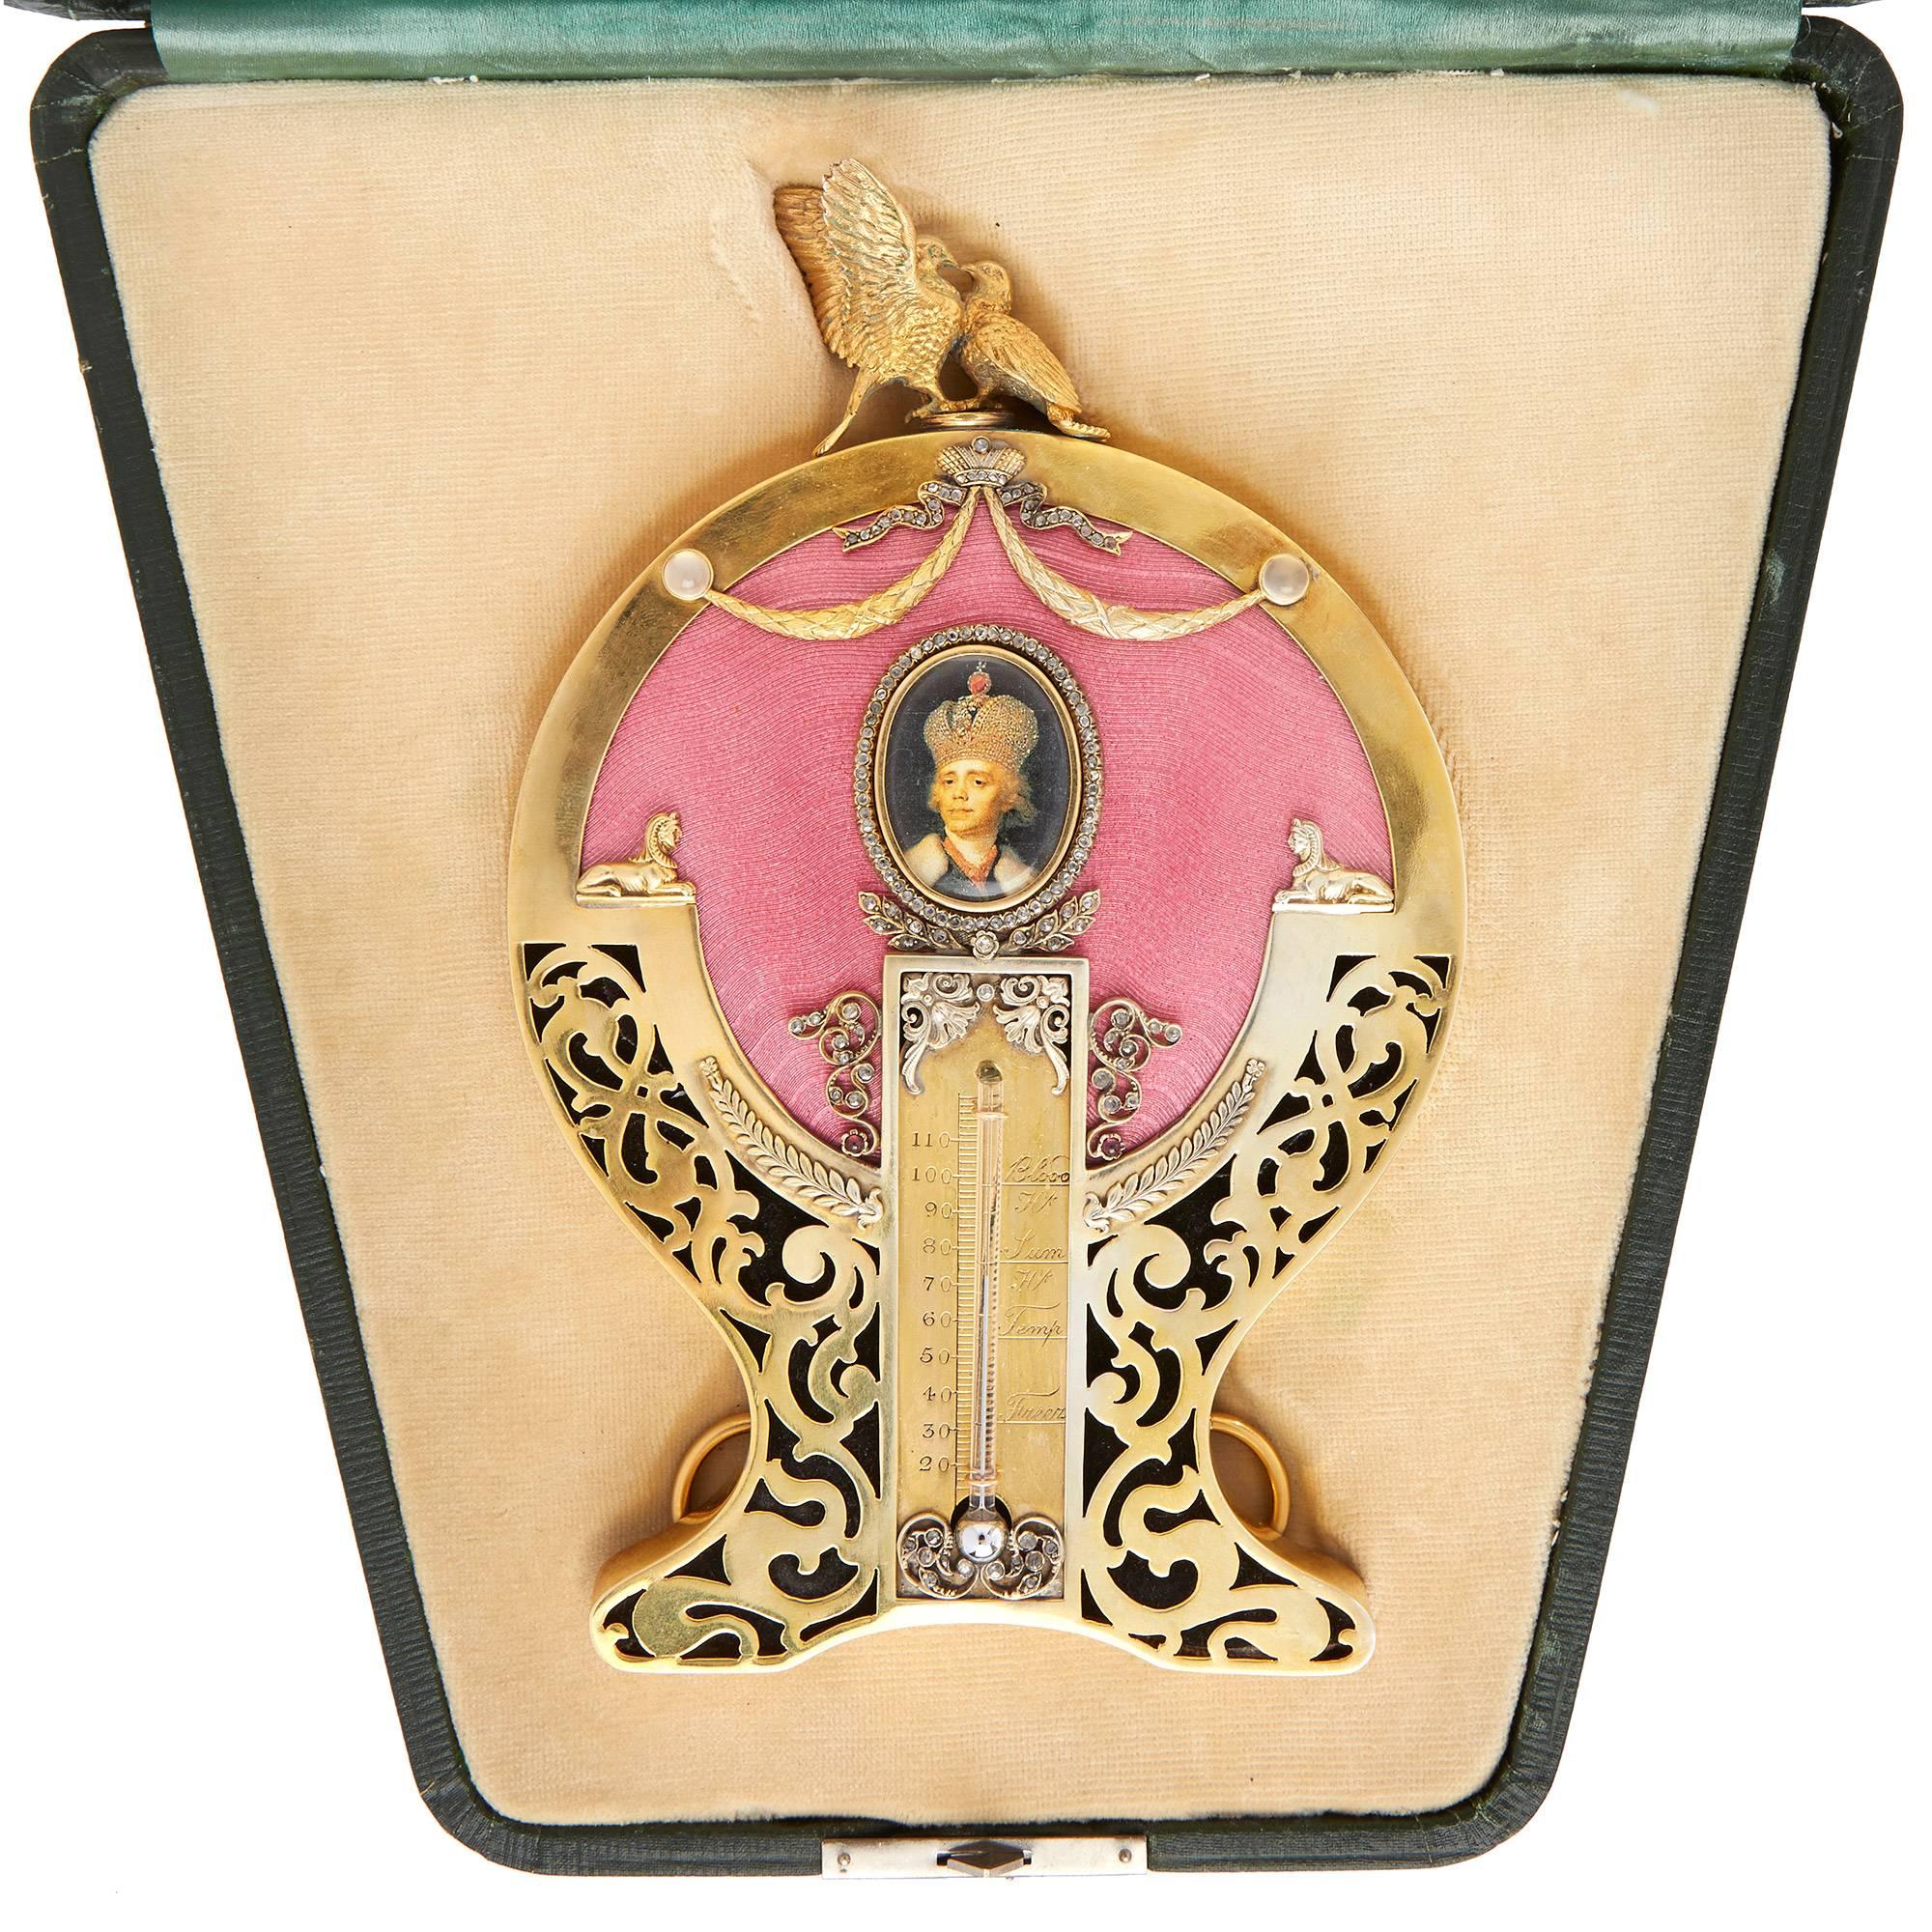 The very fine table thermometer mounted in a silver-gilt frame and set with diamonds and rubies, featuring an oval shaped photograph surrounded by a band of diamonds above the thermometer, with pink guilloché enamel decoration and silver-gilt